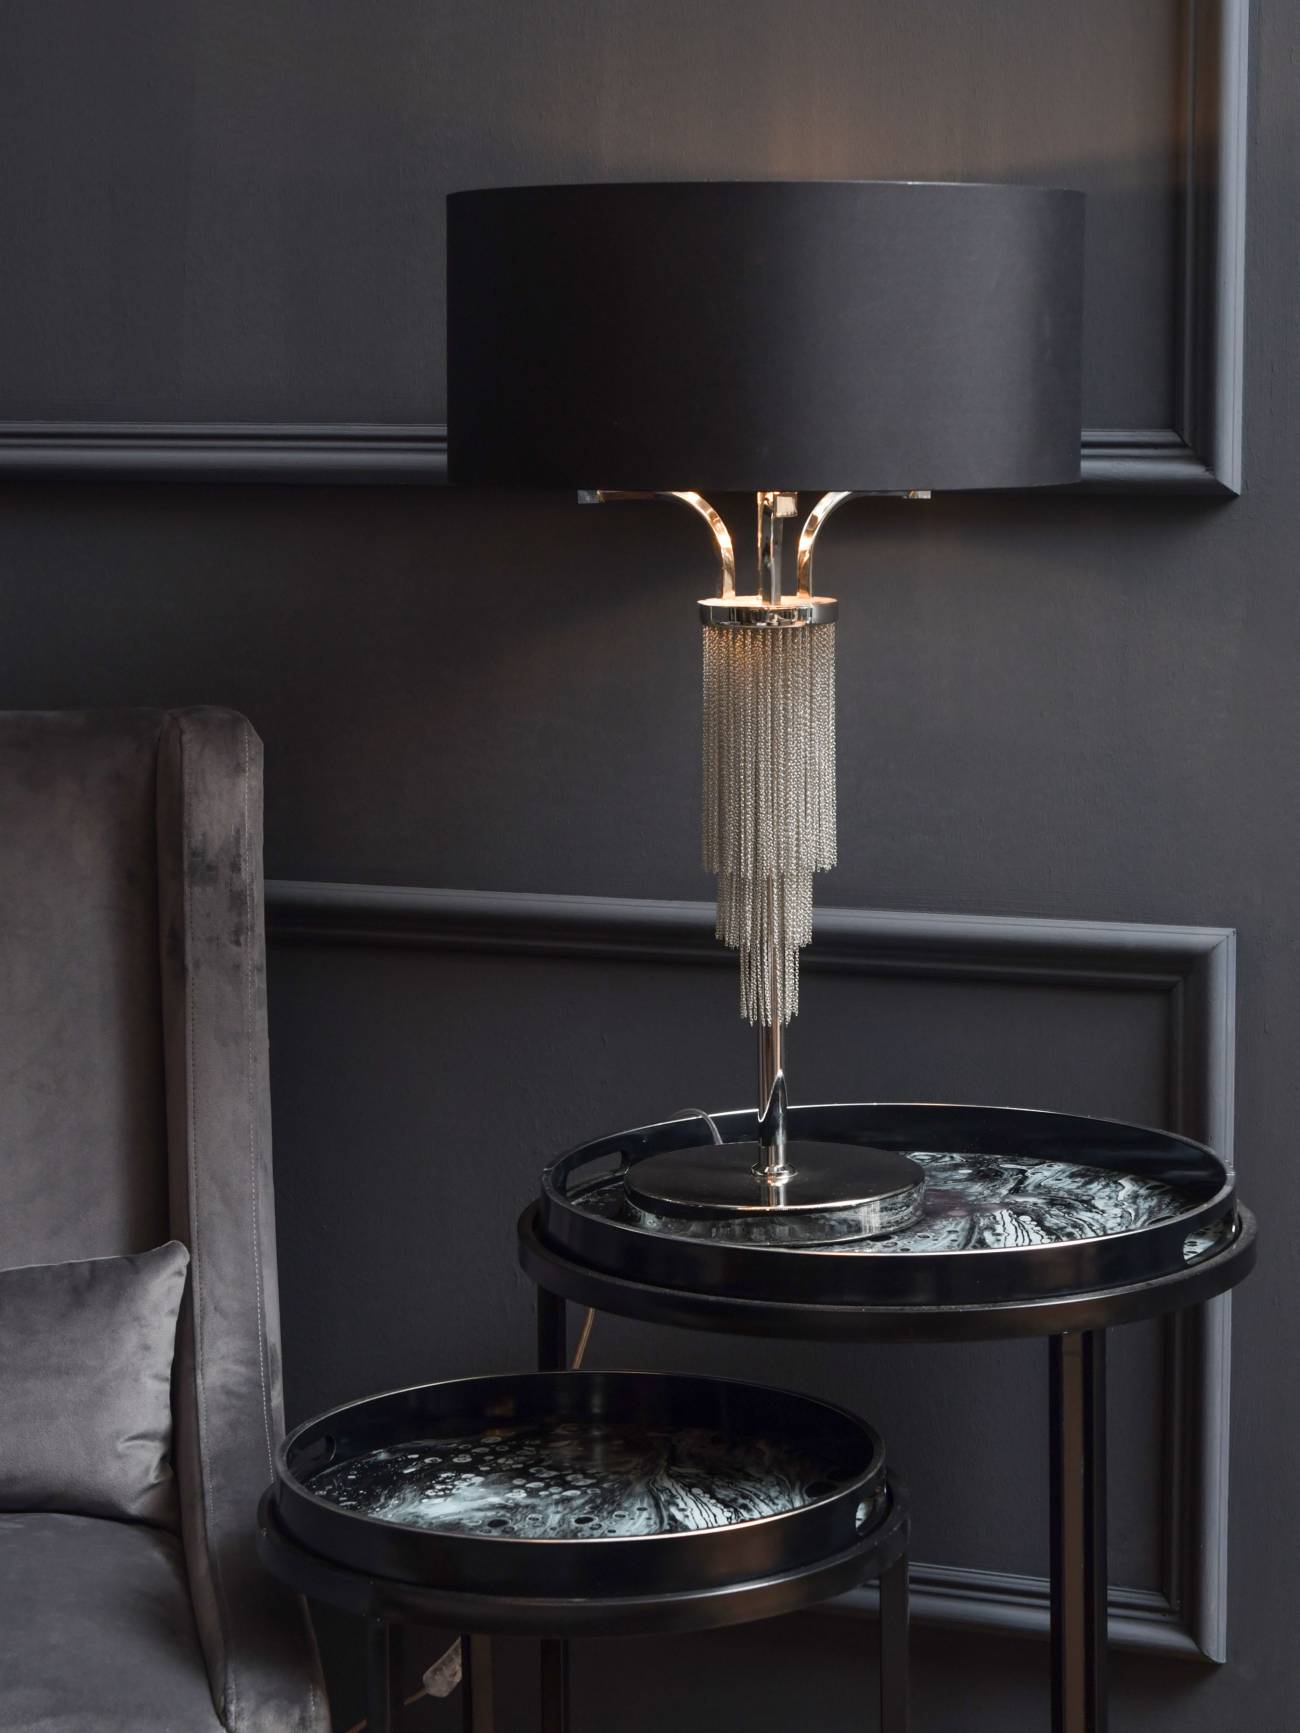 Chain Detail Table Lamp In Nickel With Black Shade